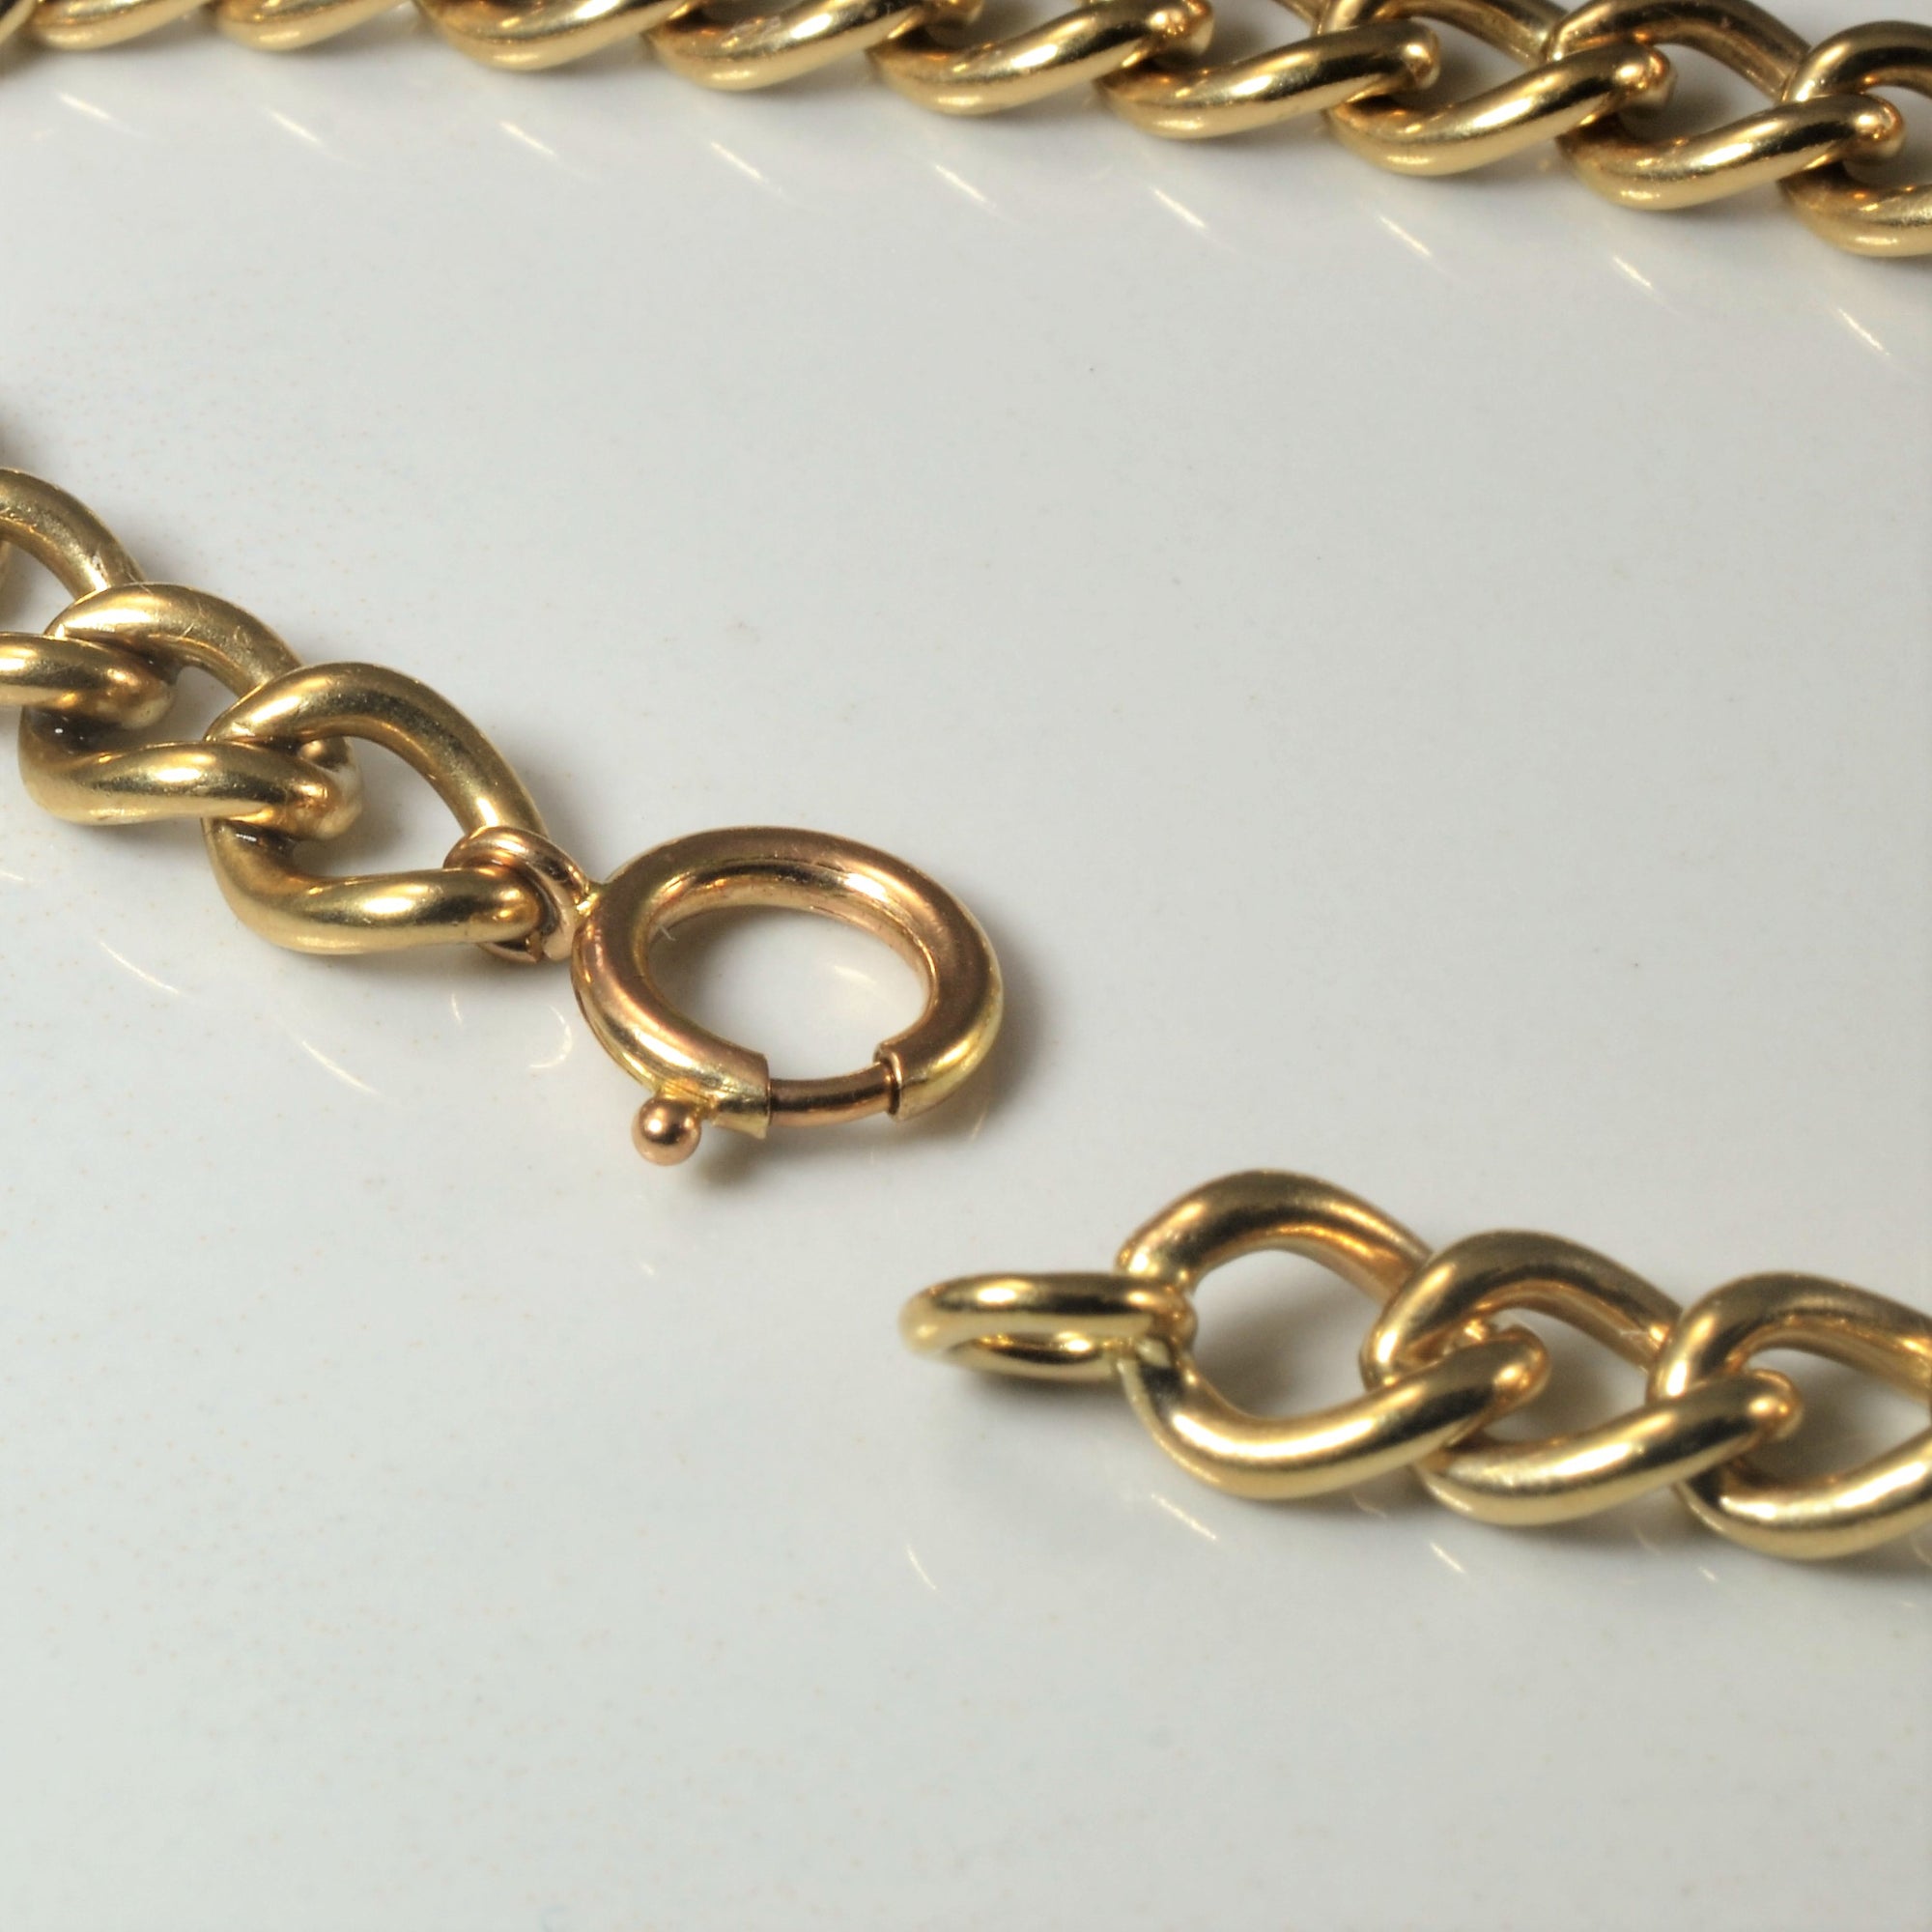 Yellow Gold Cable Chain Bracelet | 7.5